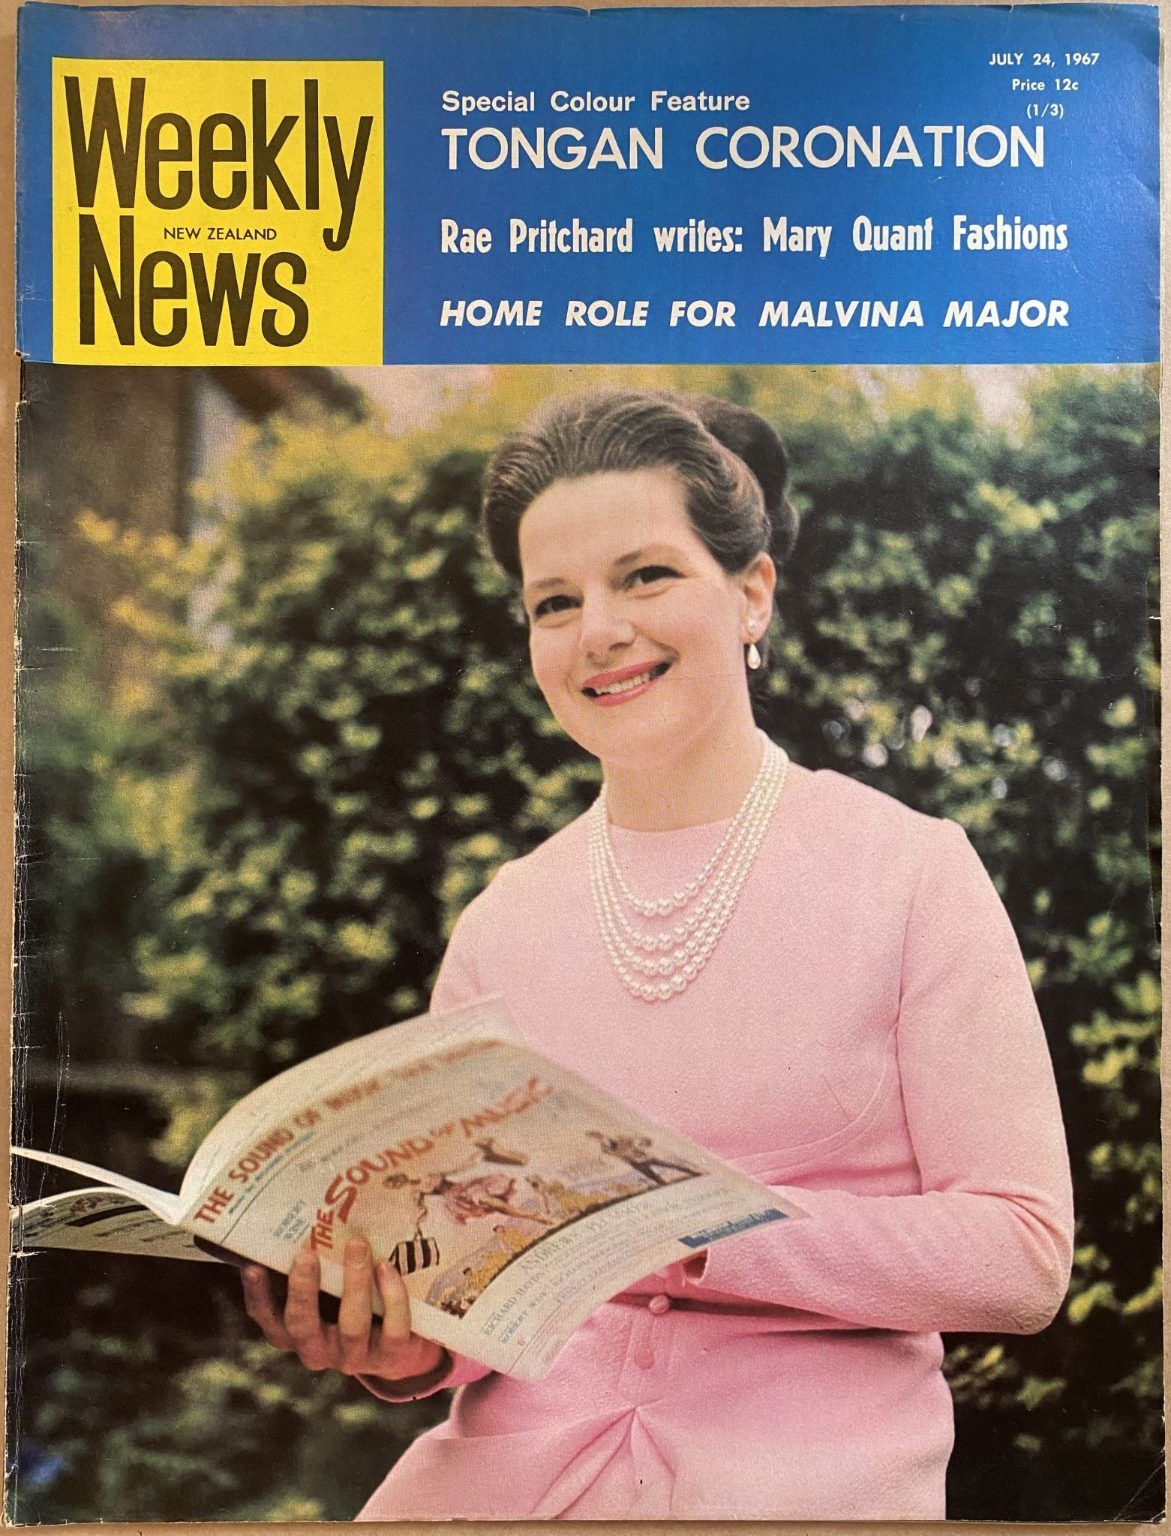 OLD NEWSPAPER: New Zealand Weekly News, No. 5408, 24 July 1967